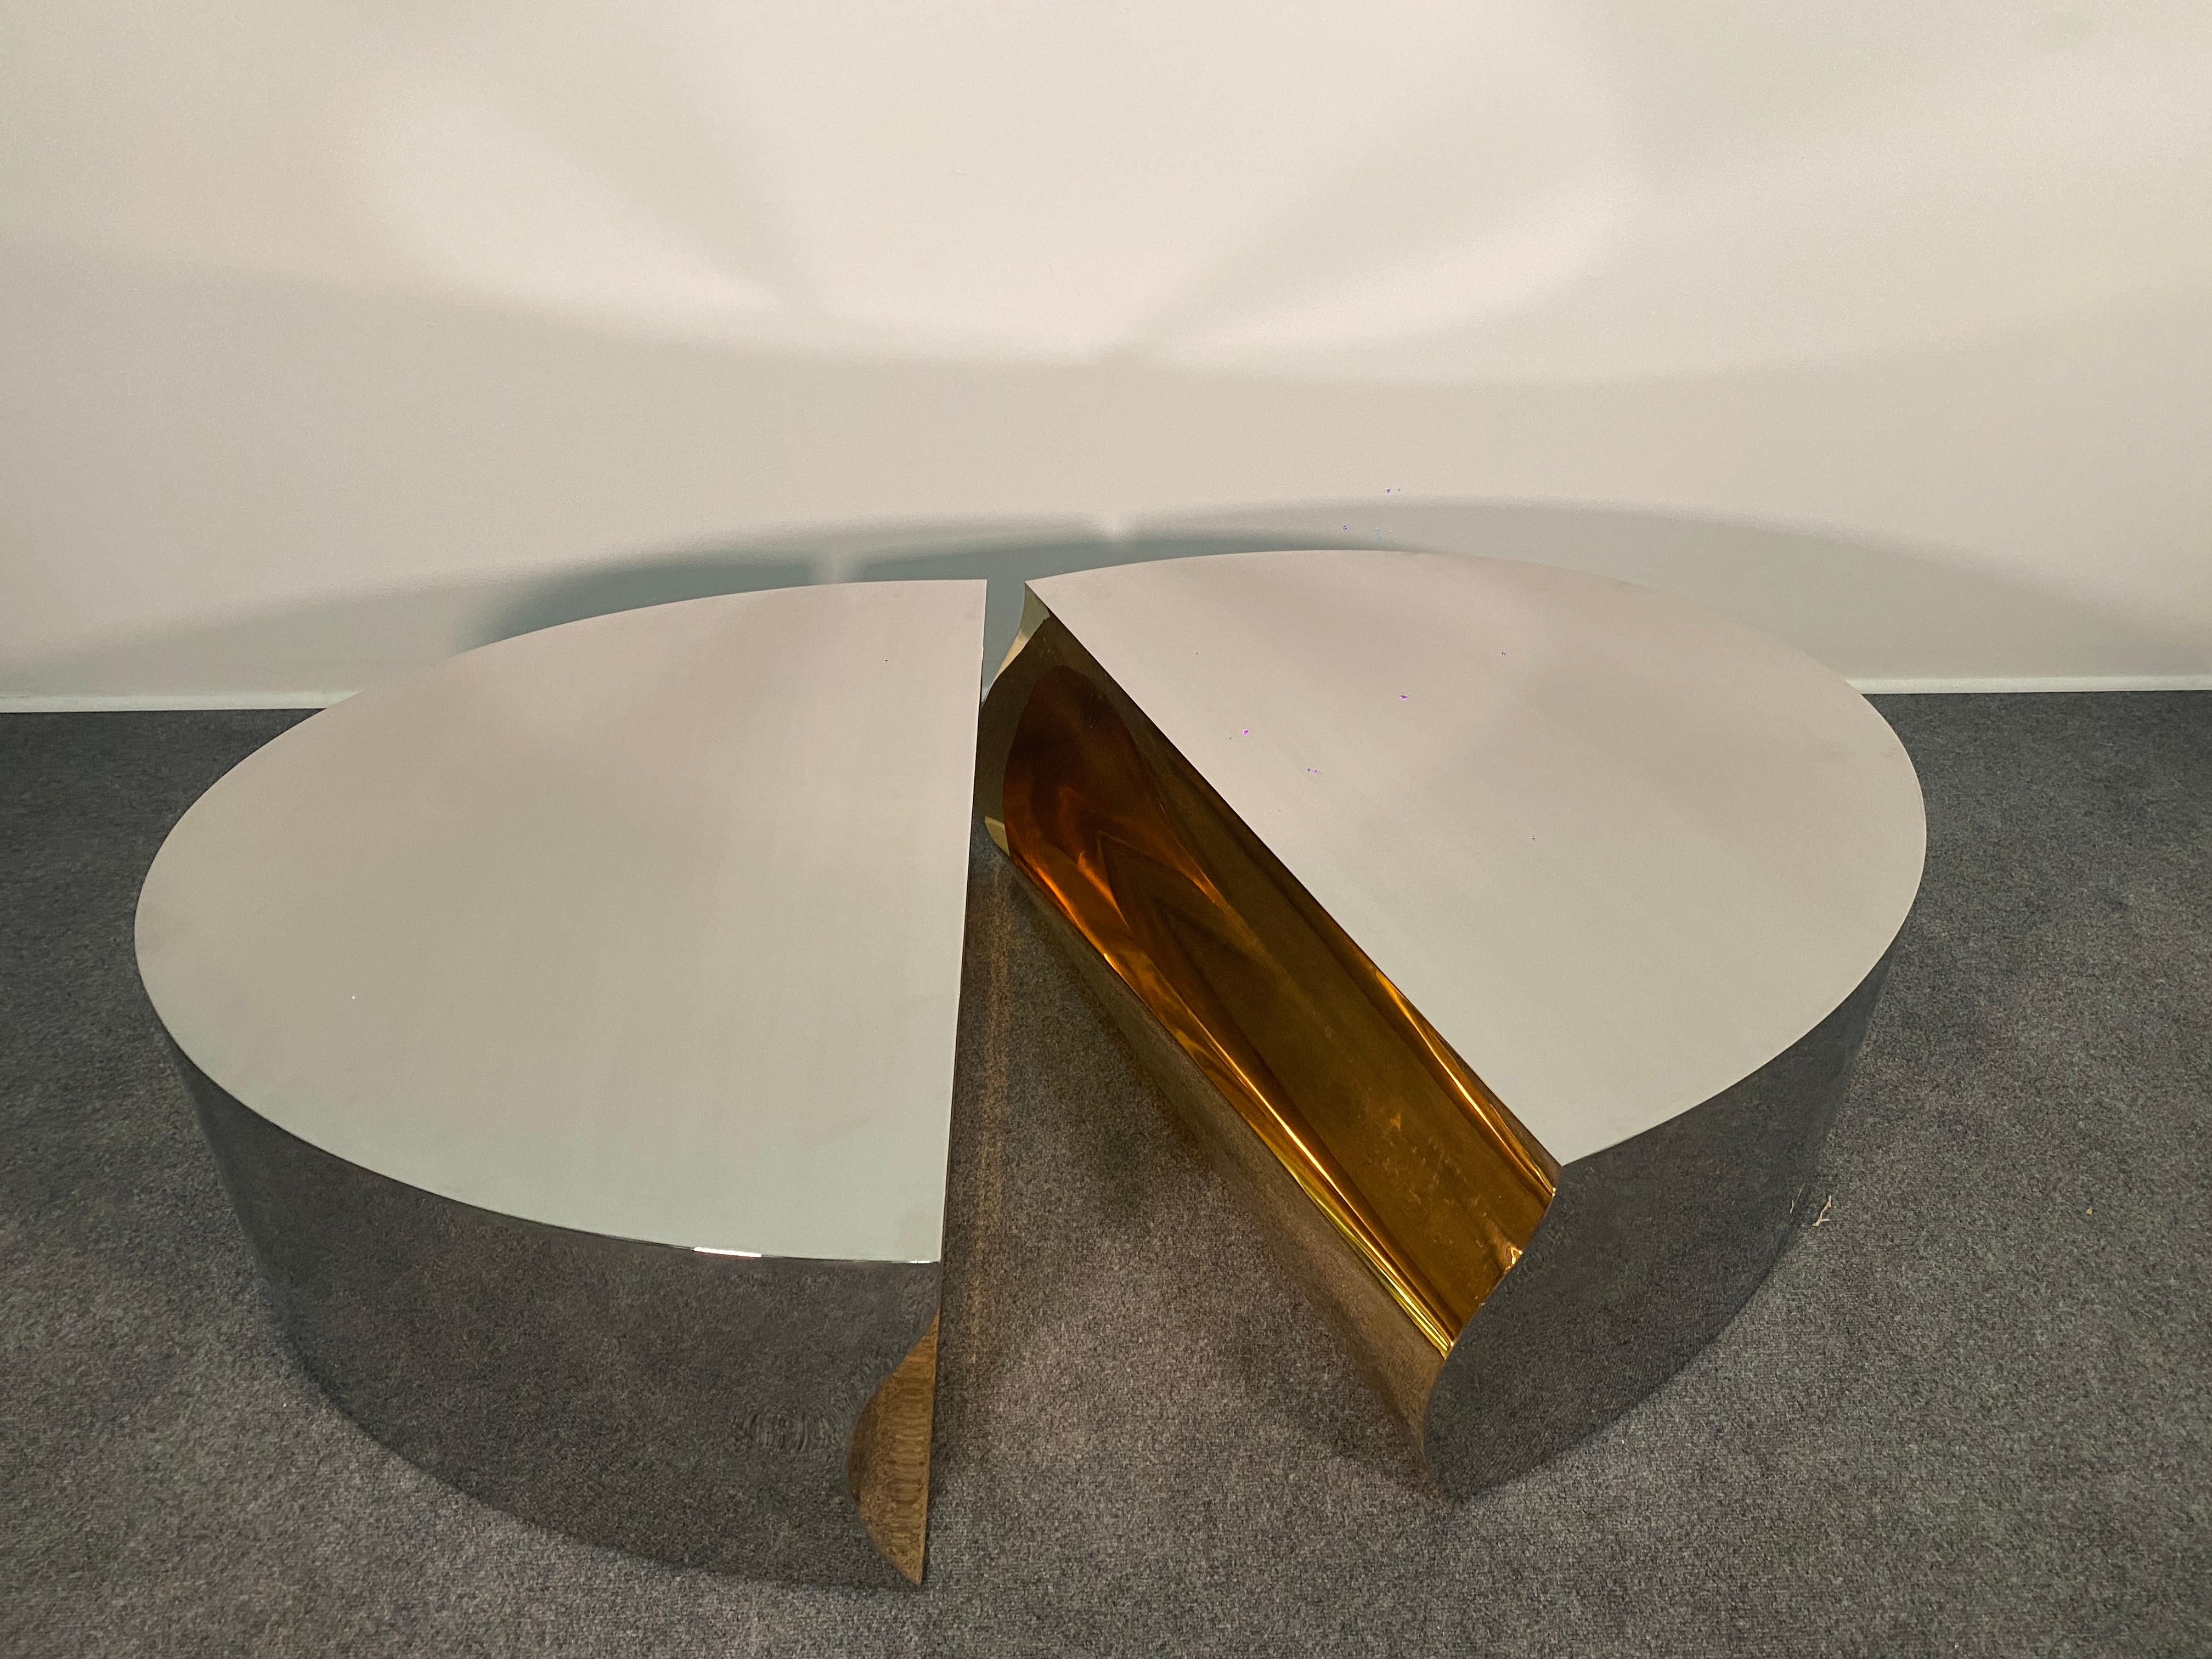 K.S. Mark V - American Modern Mirror Polished Stainless Steel Polished Bronze Center Detail Recessed Casters Freeform Cocktail Table.
 
Shipping is $900.00 